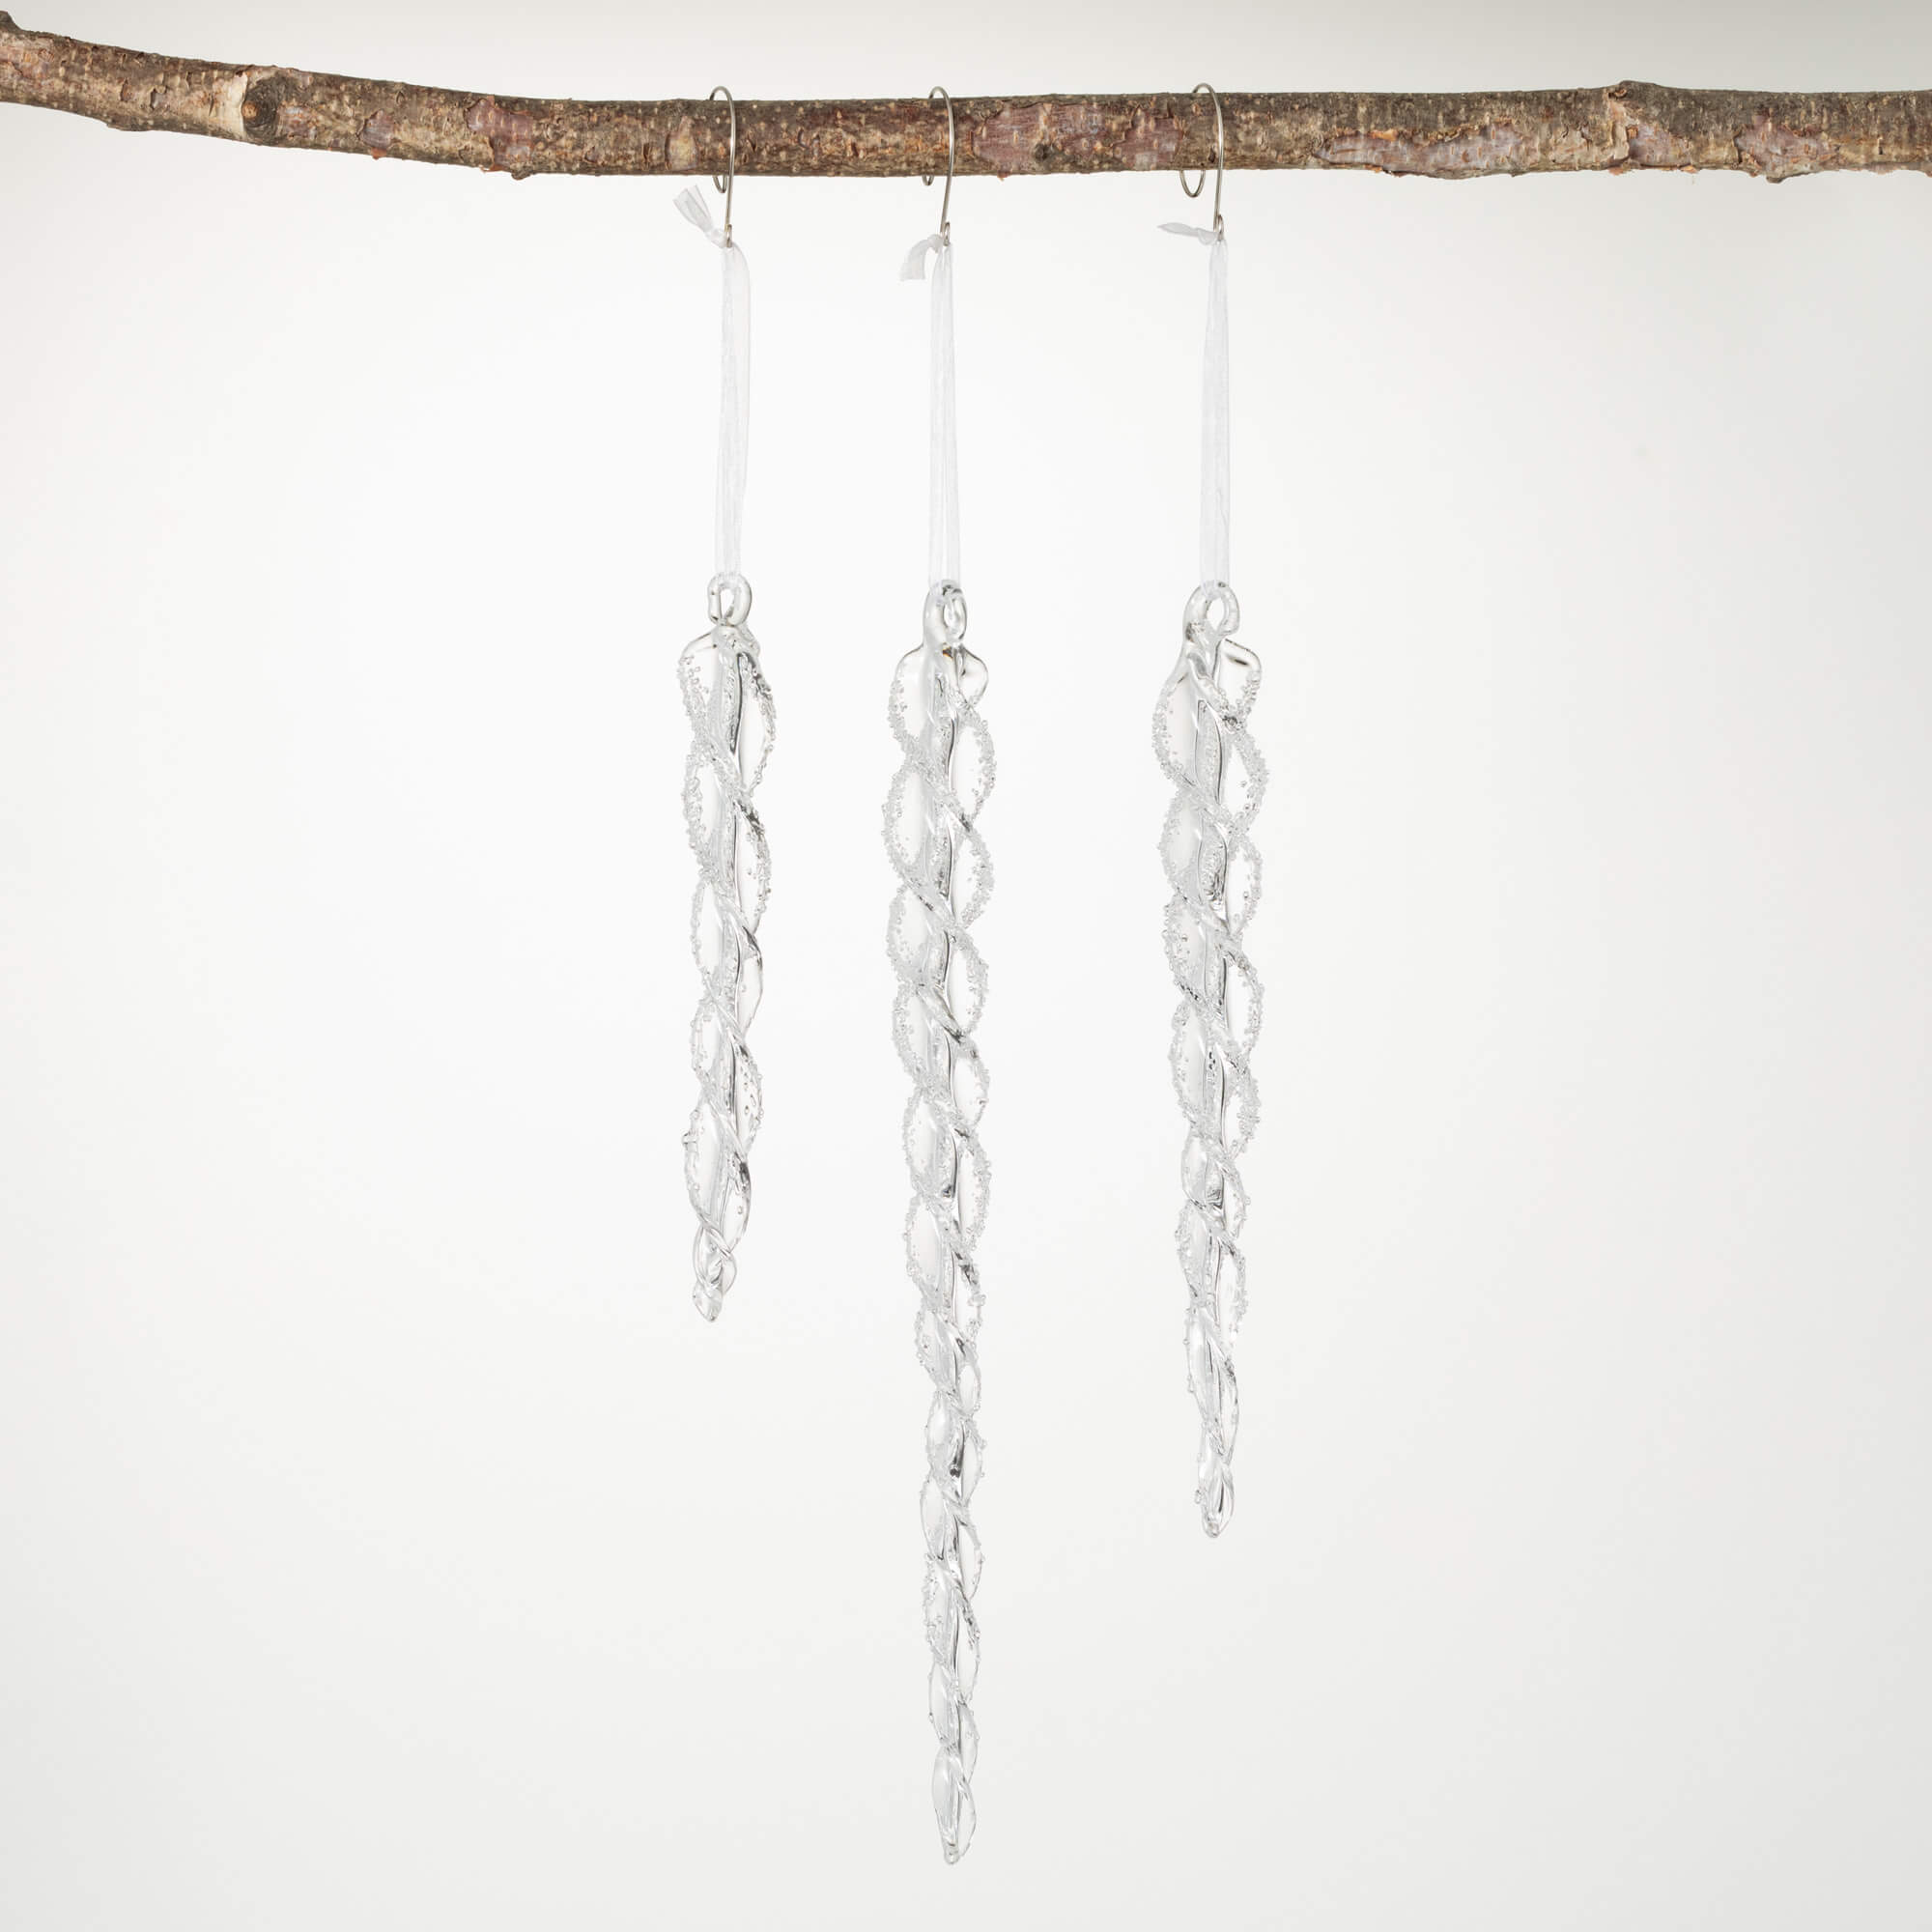 TWISTED GLASS ICICLE ORNAMENTS